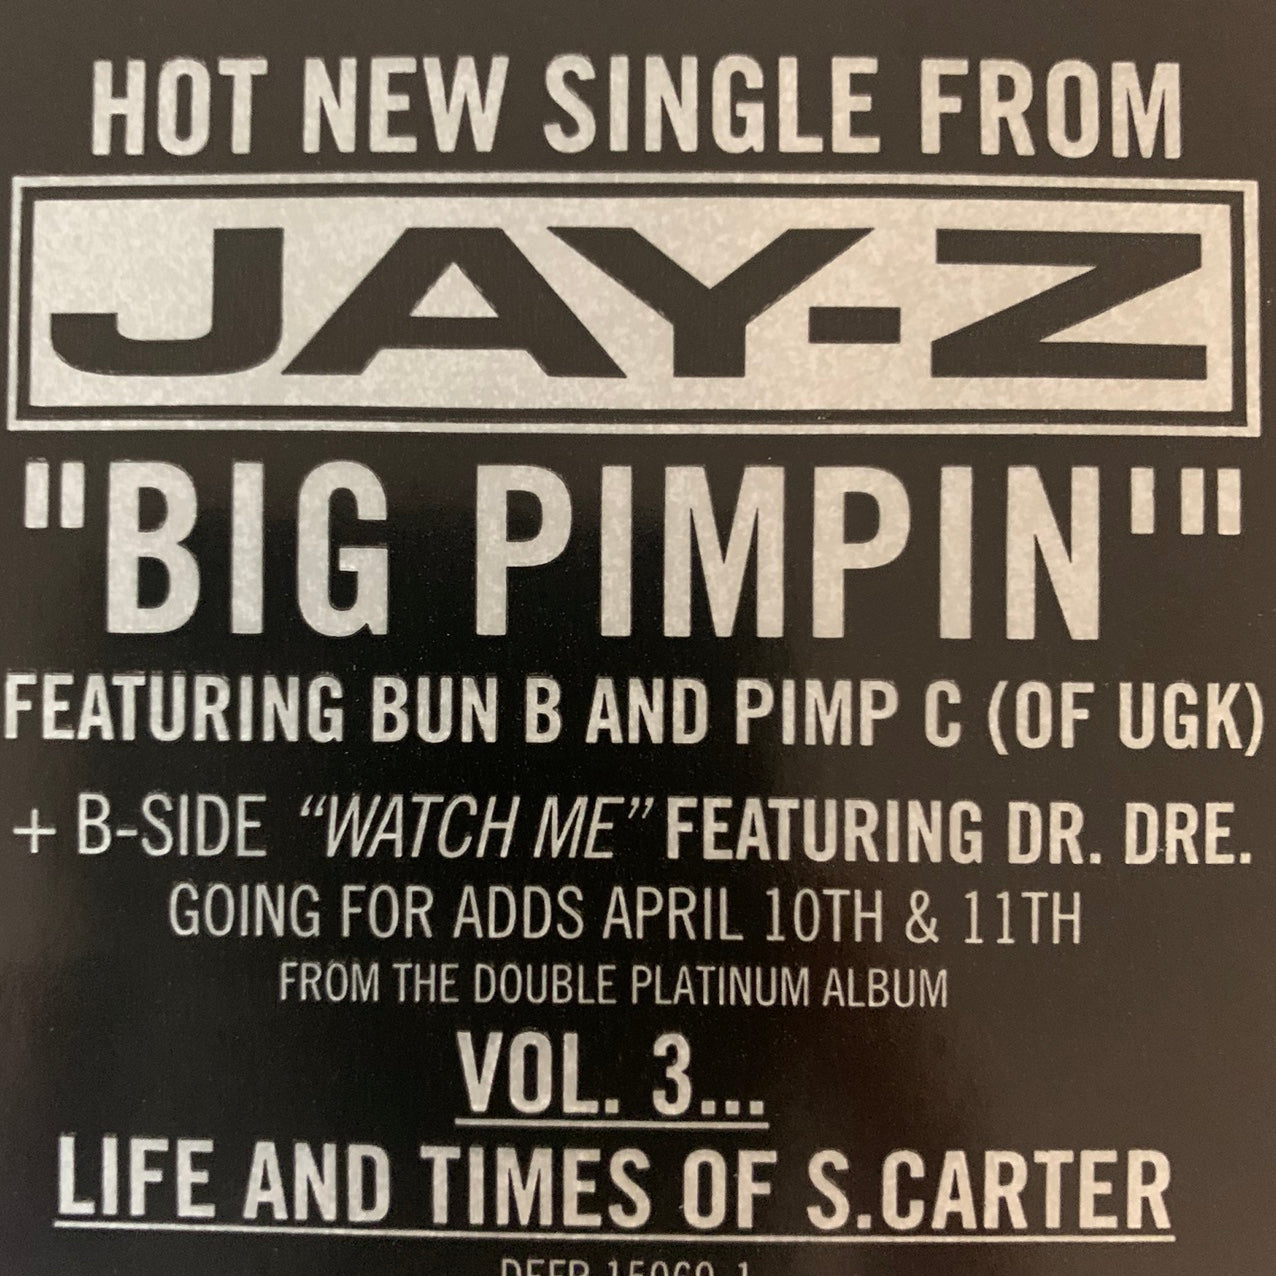 Jay-Z “Big Pimpin” / “Watch Me” Feat Dr Dre 6 Track 12inch Vinyl S